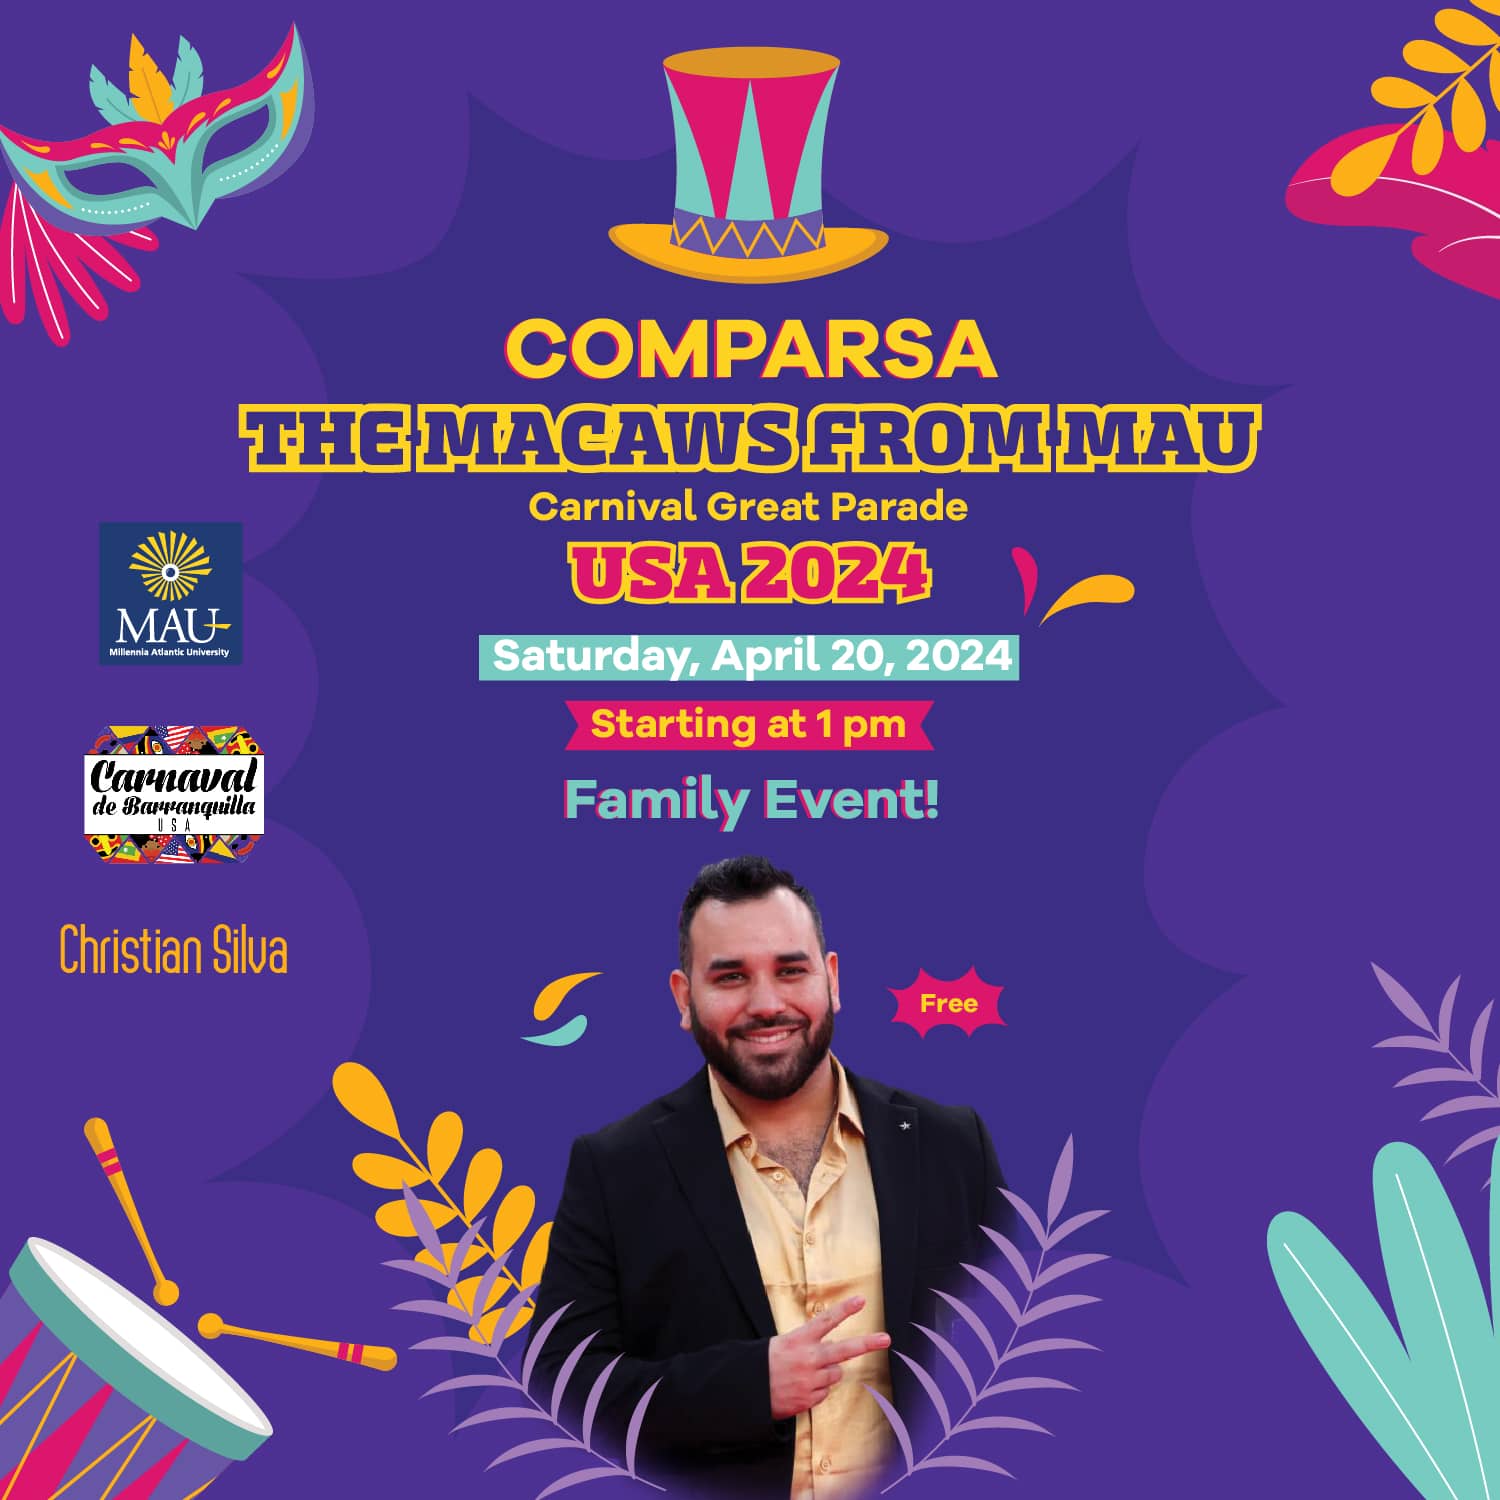 Millennia Atlantic University is thrilled to invite you to “The Great Parade of the Barranquilla Carnival Miami-USA” on Saturday, April 20th, from 12:00 p.m. until 6:00 p.m.